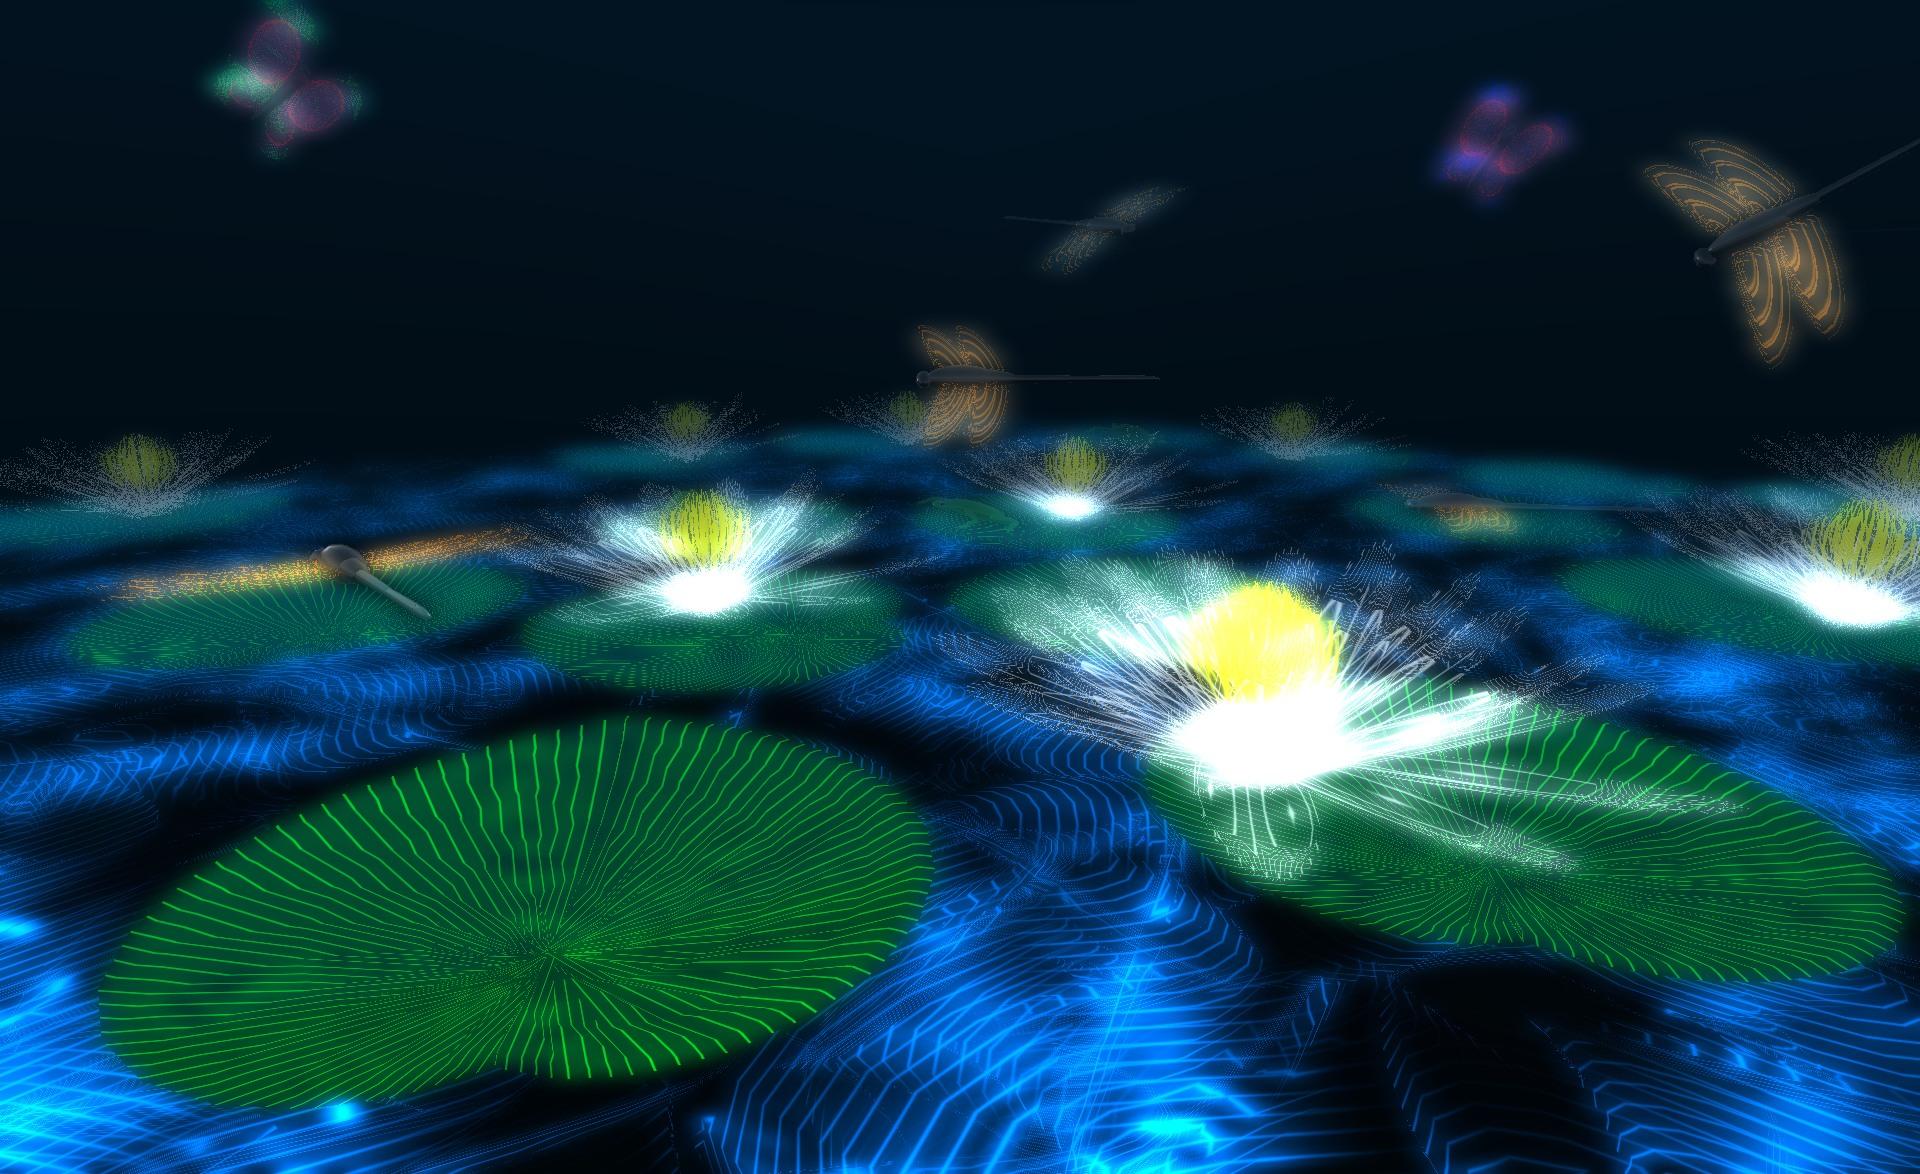 A glow illustration of lily pads generated in the video game Second Life.